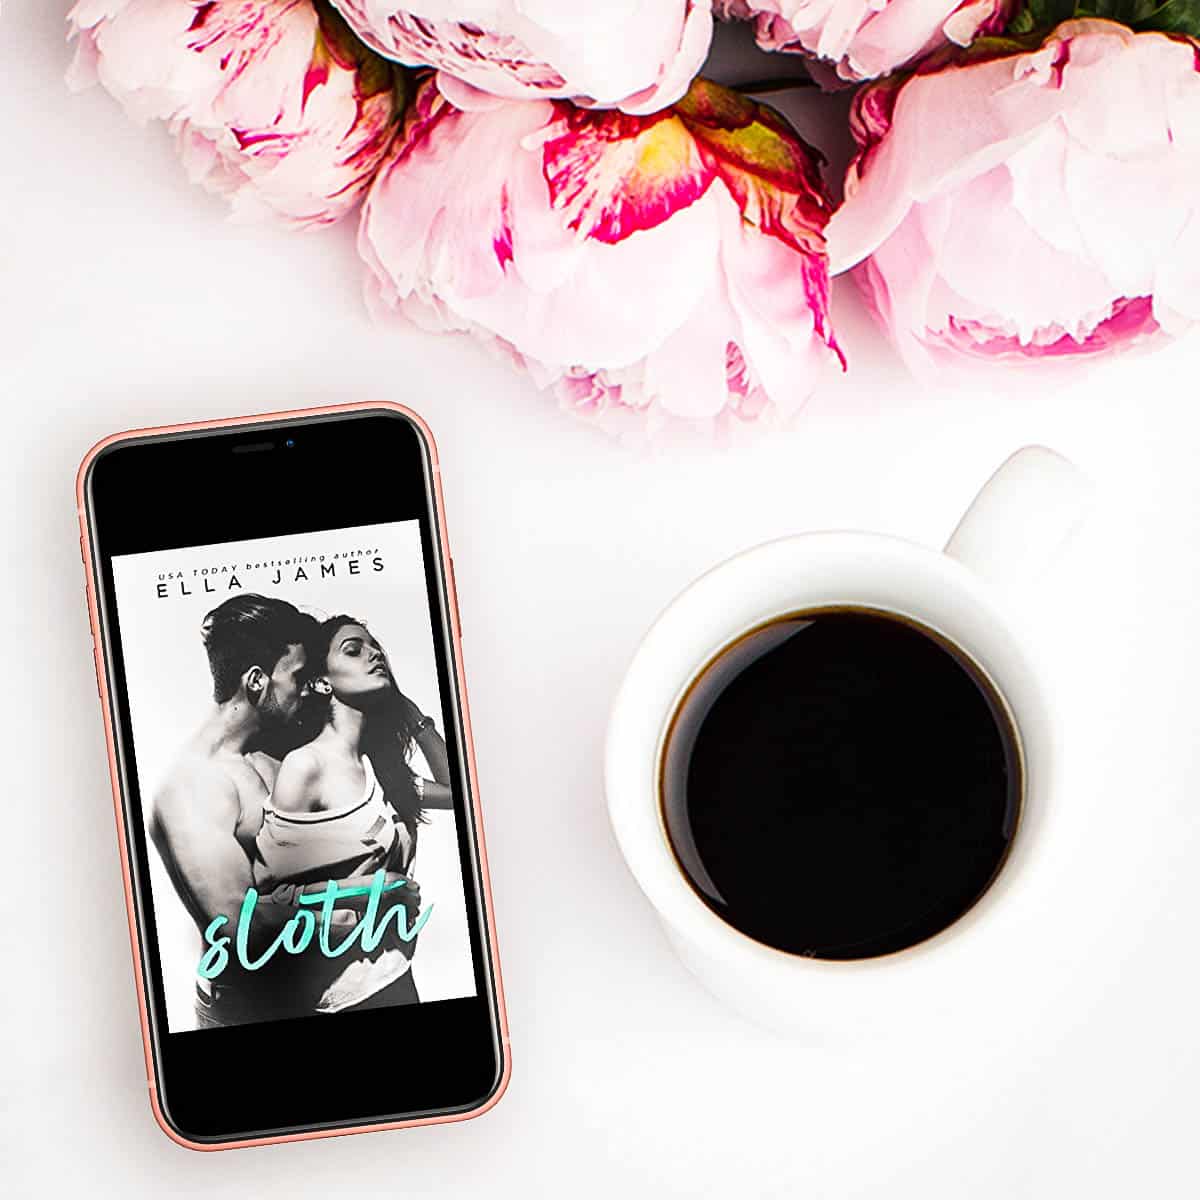 Read a most definitely NSFW excerpt from Sloth by Ella James, the first book in the Sinful Secrets series, an erotic romance with a unique and intricate story with a surprise twist that will floor you!